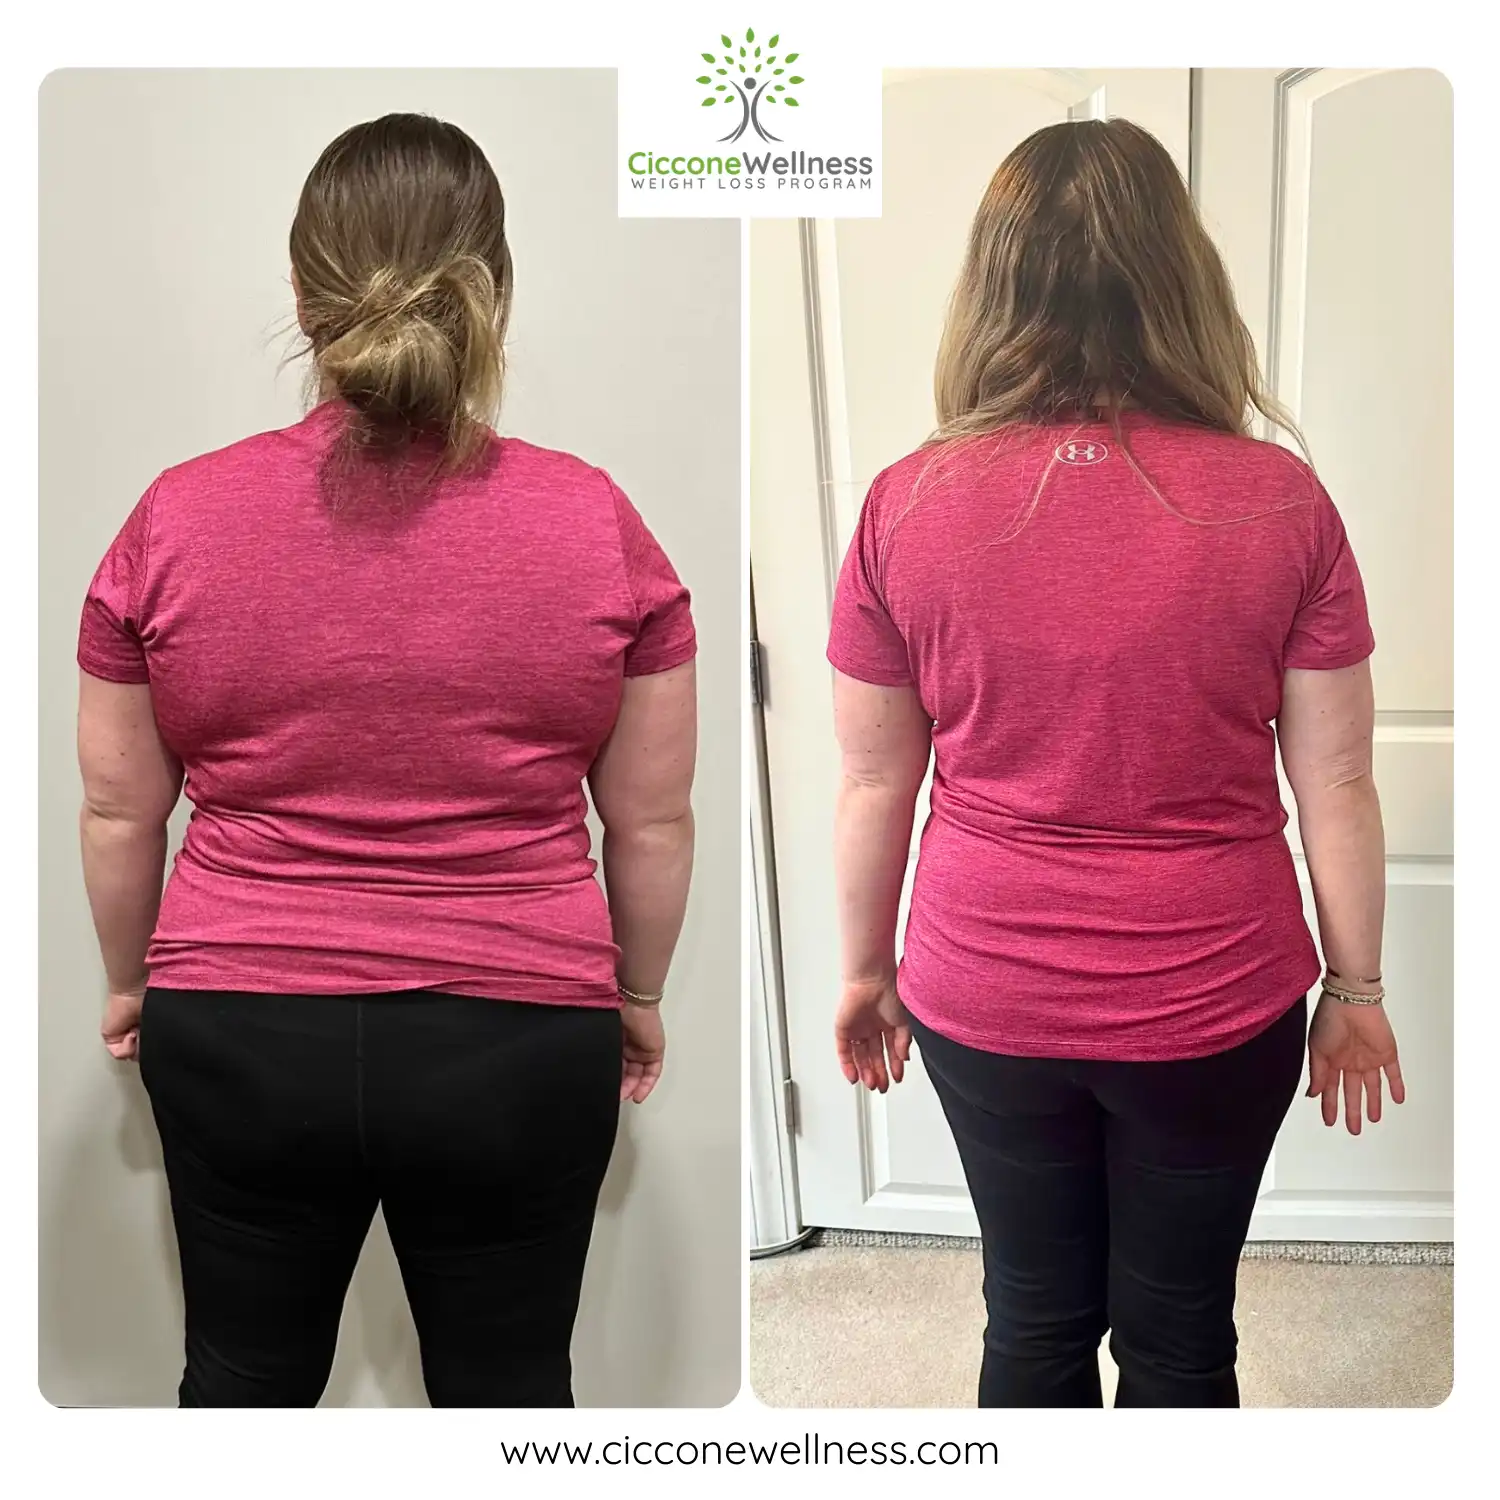 Nicole Q before and after weight loss back view